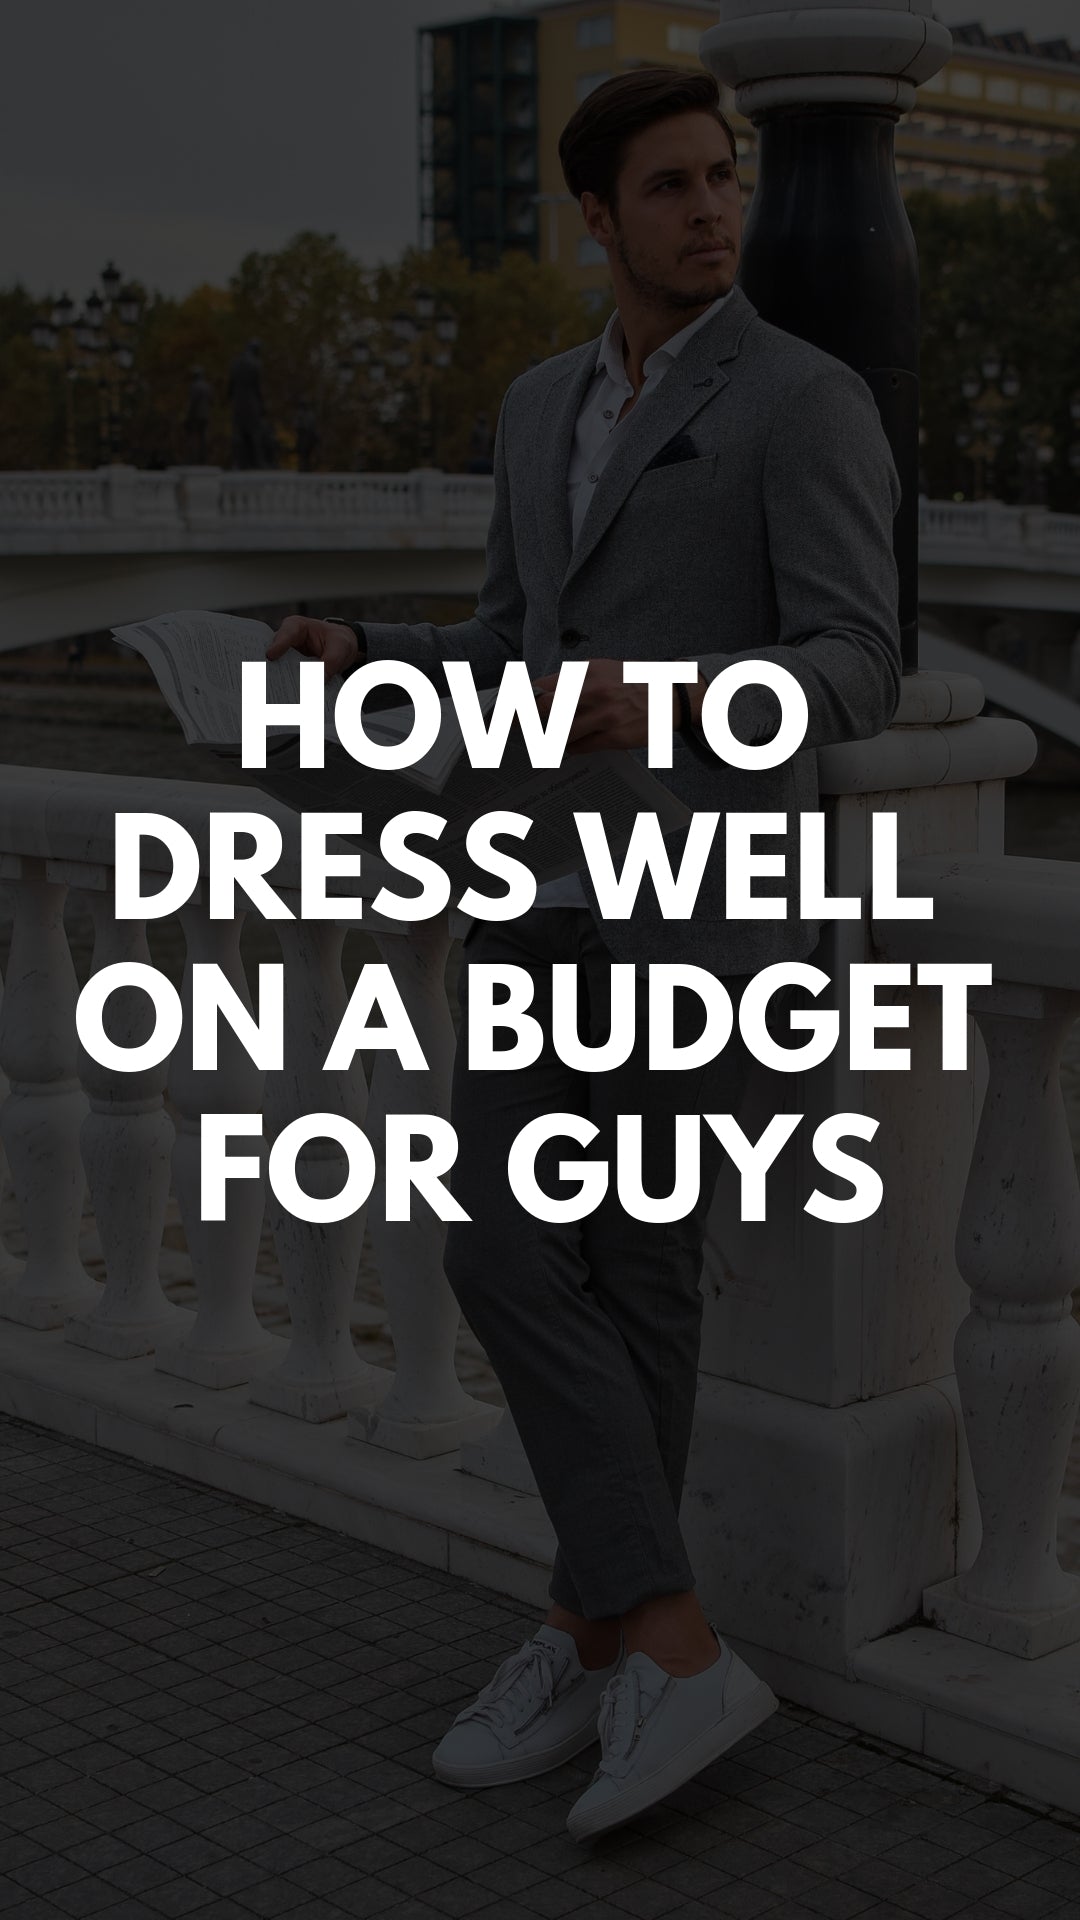 How To Dress Well On a Budget For Guys #fashiontips #styletips